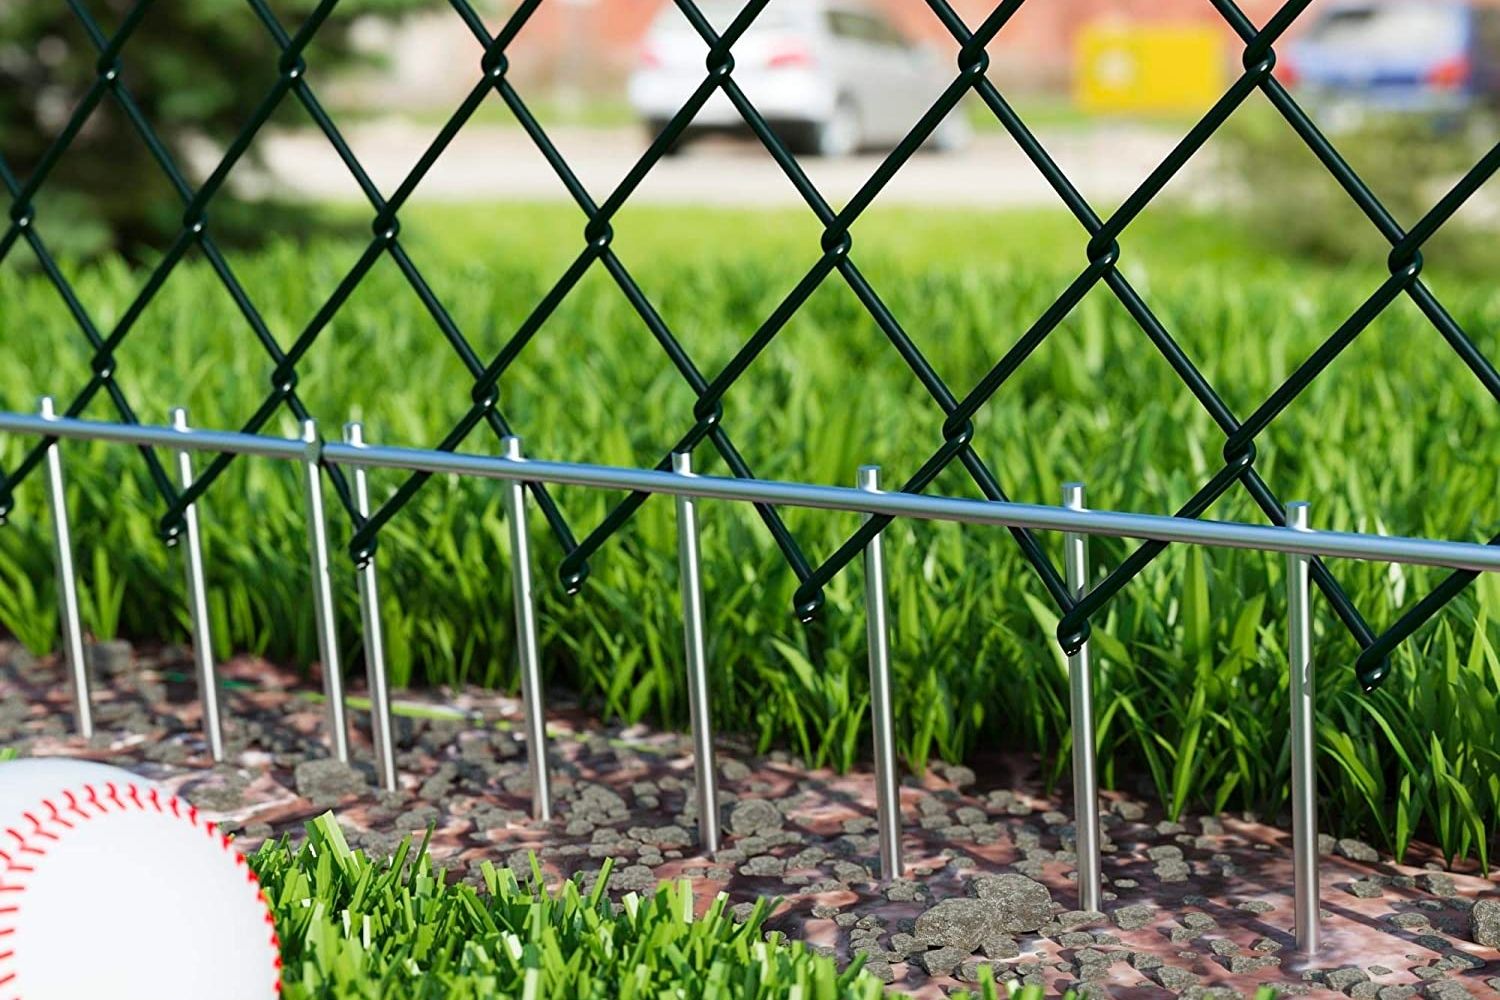 The Best Fences for Dogs Options